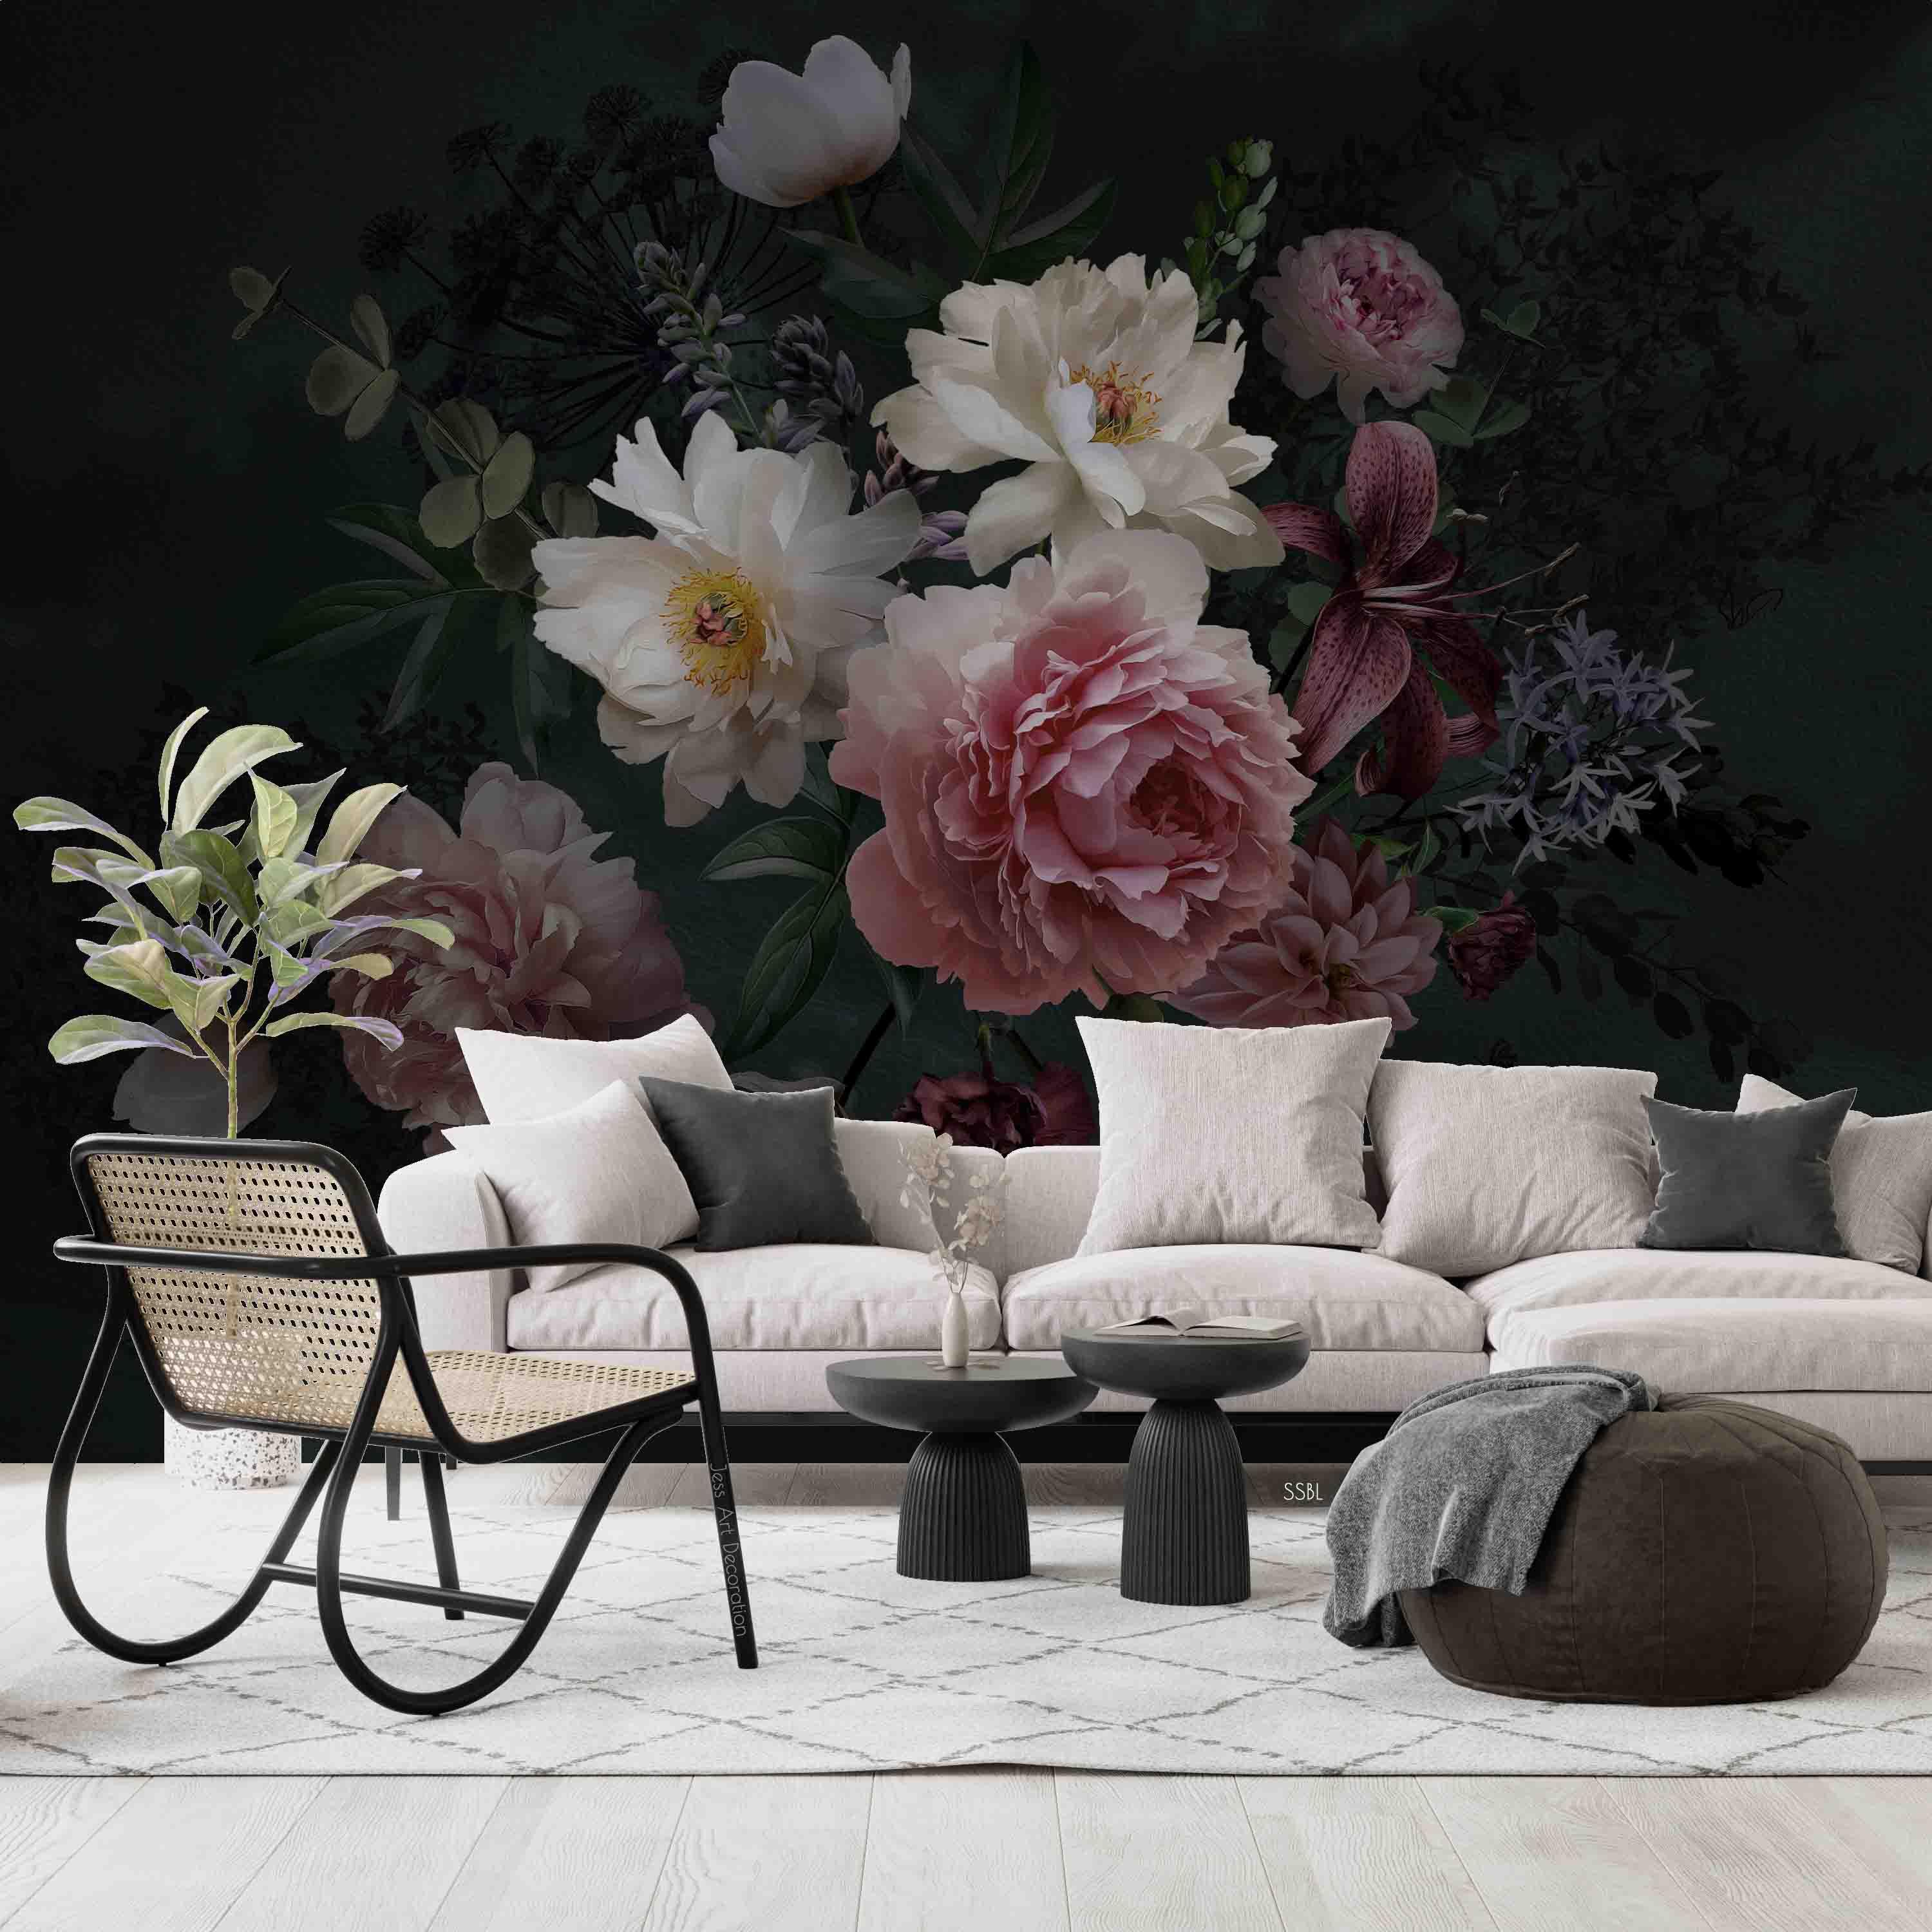 3D Vintage Blooming Peony Pattern Wall Mural Wallpaper GD 3551- Jess Art Decoration